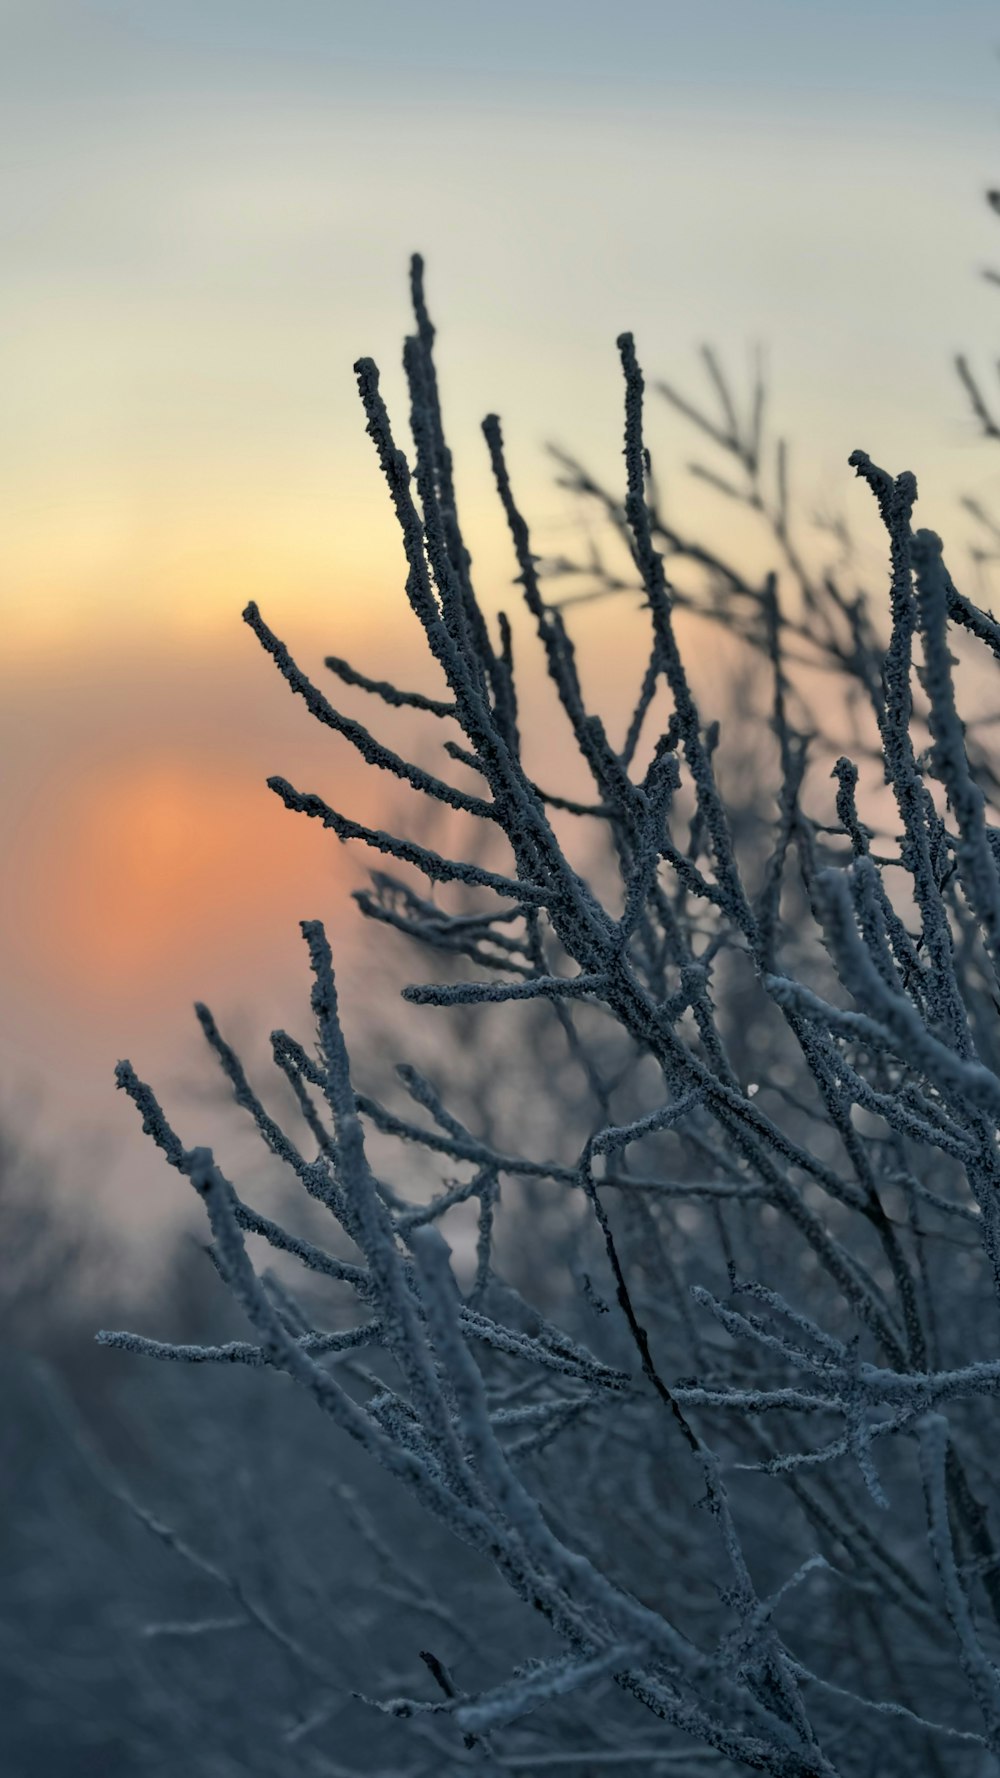 a close up of a tree branch with a sunset in the background